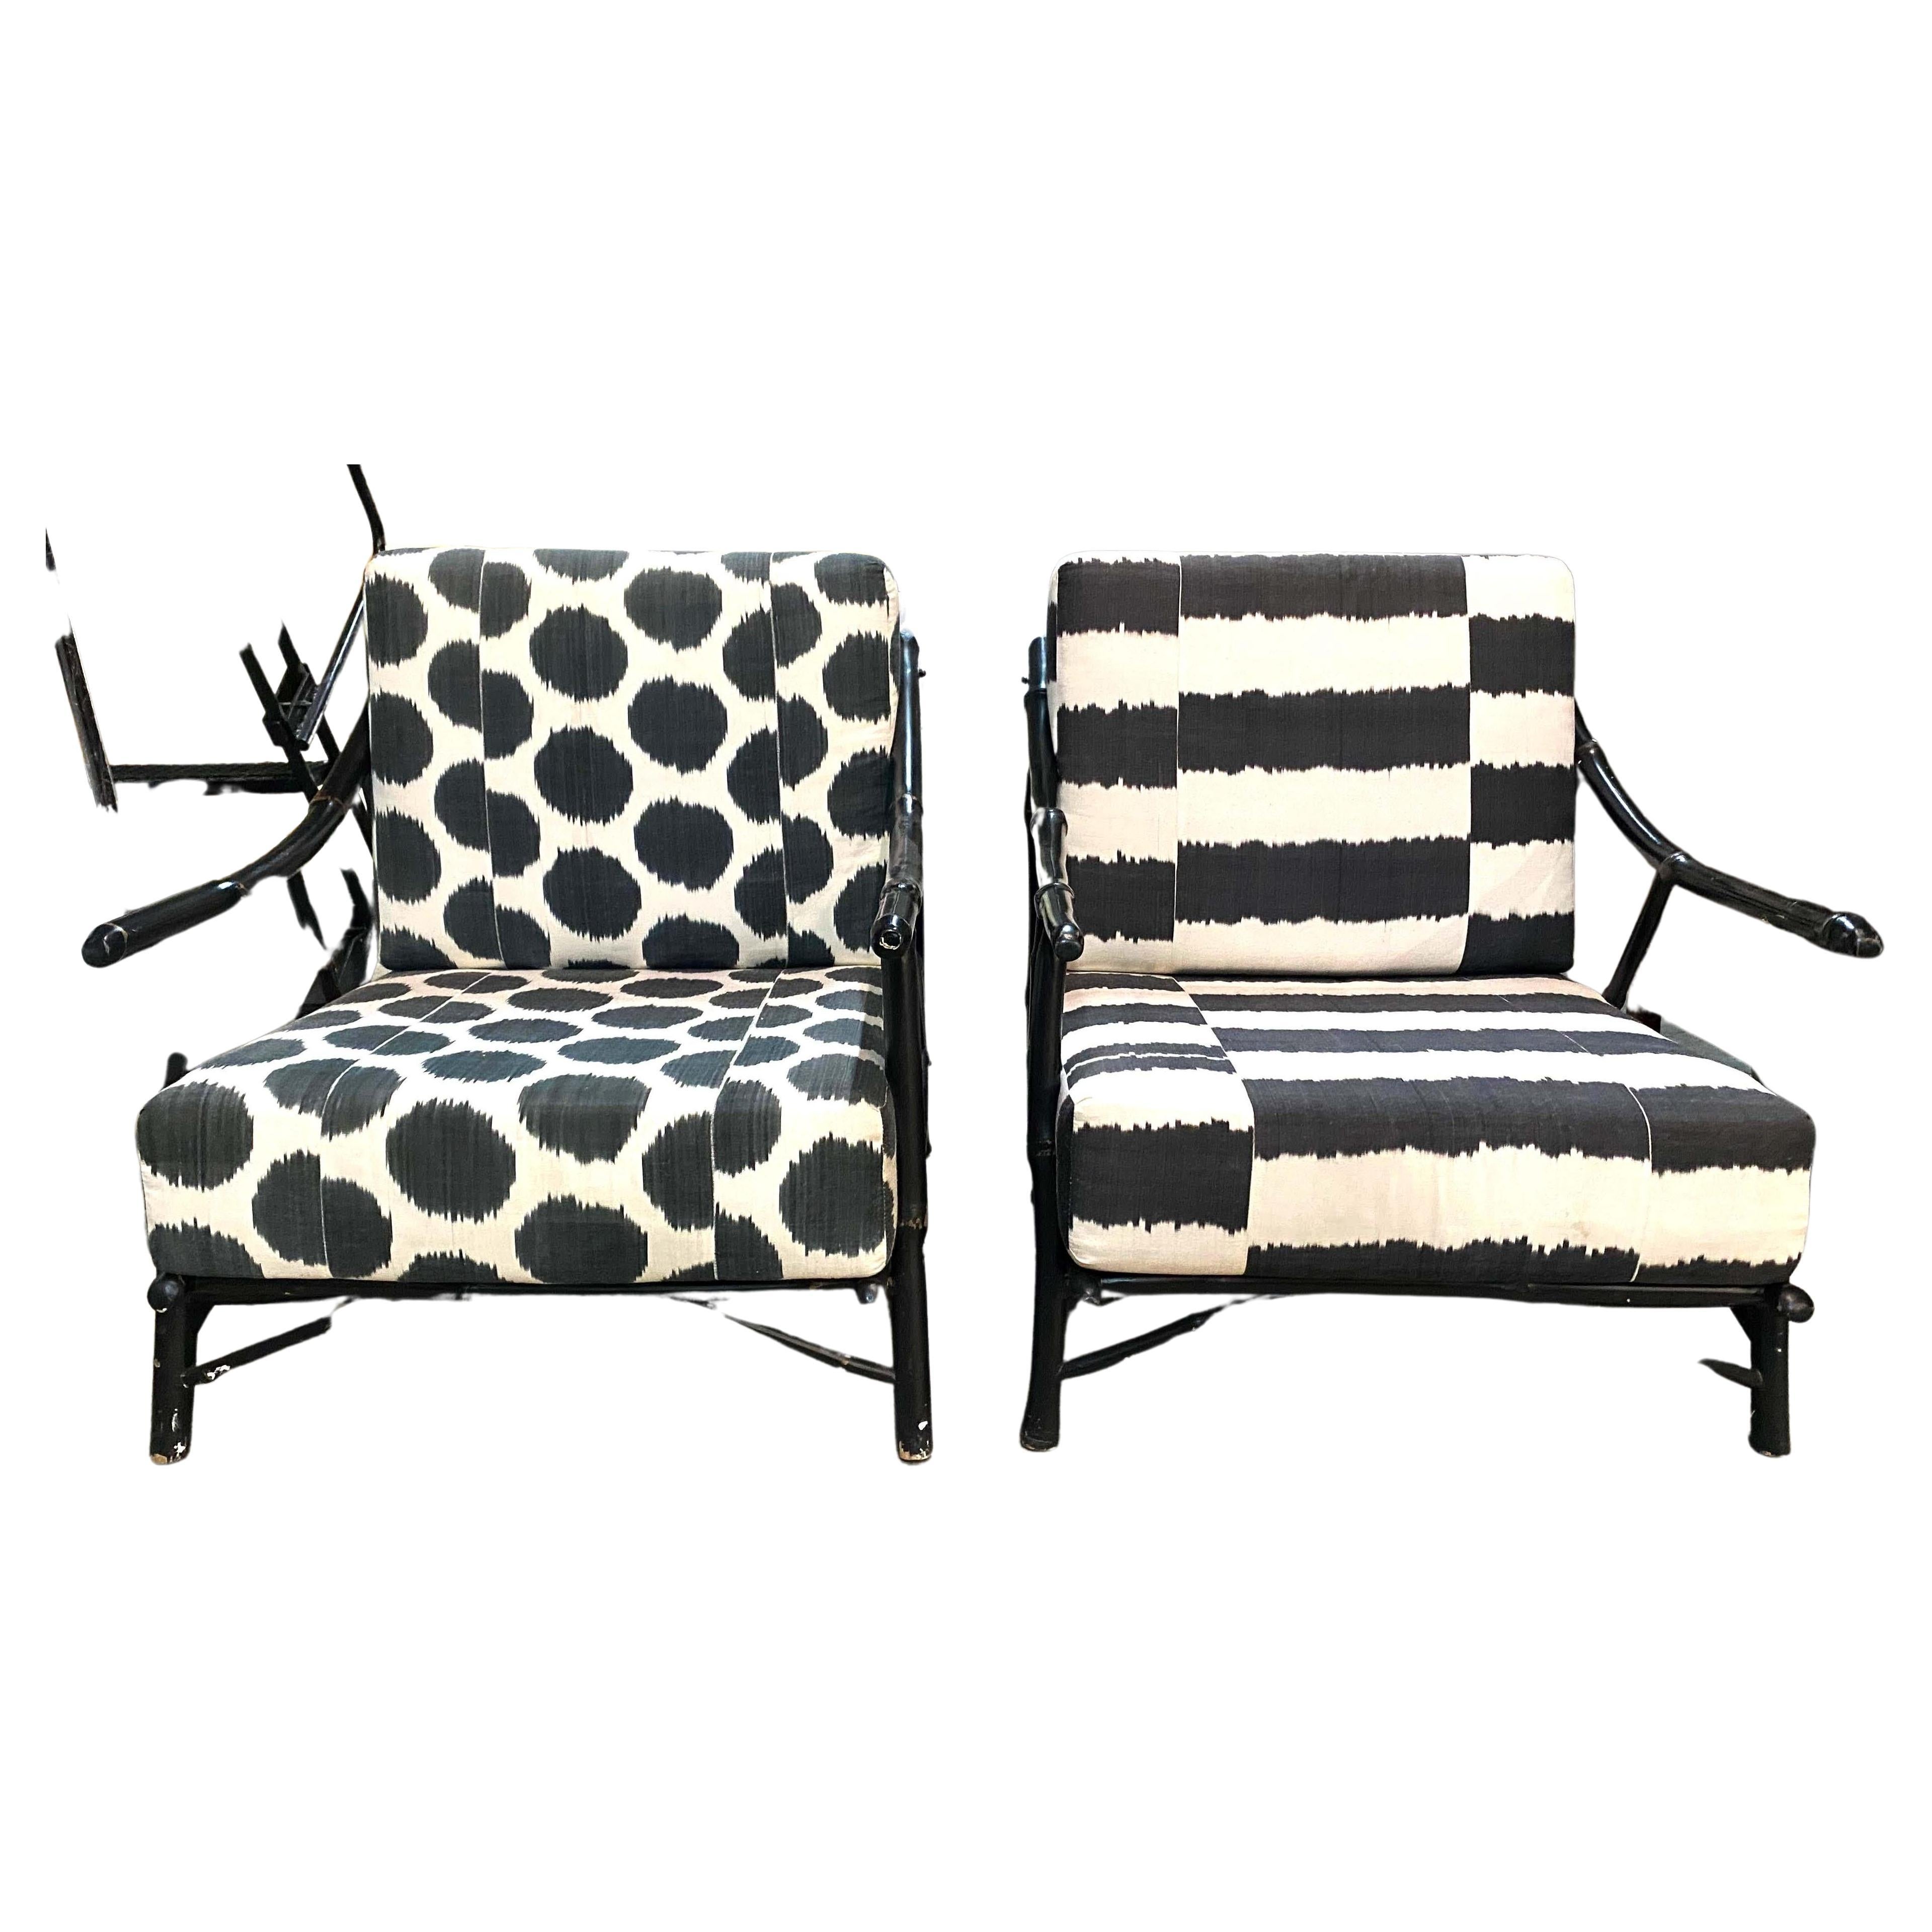 These Black Bamboo Rattan Chippendale Style Lounge chair in black bamboo rattan is accented with custom cushion cover in black and white ikat style fabric, one with striped fabric, the other with polka dot patterned fabric. Handcrafted lounge chair